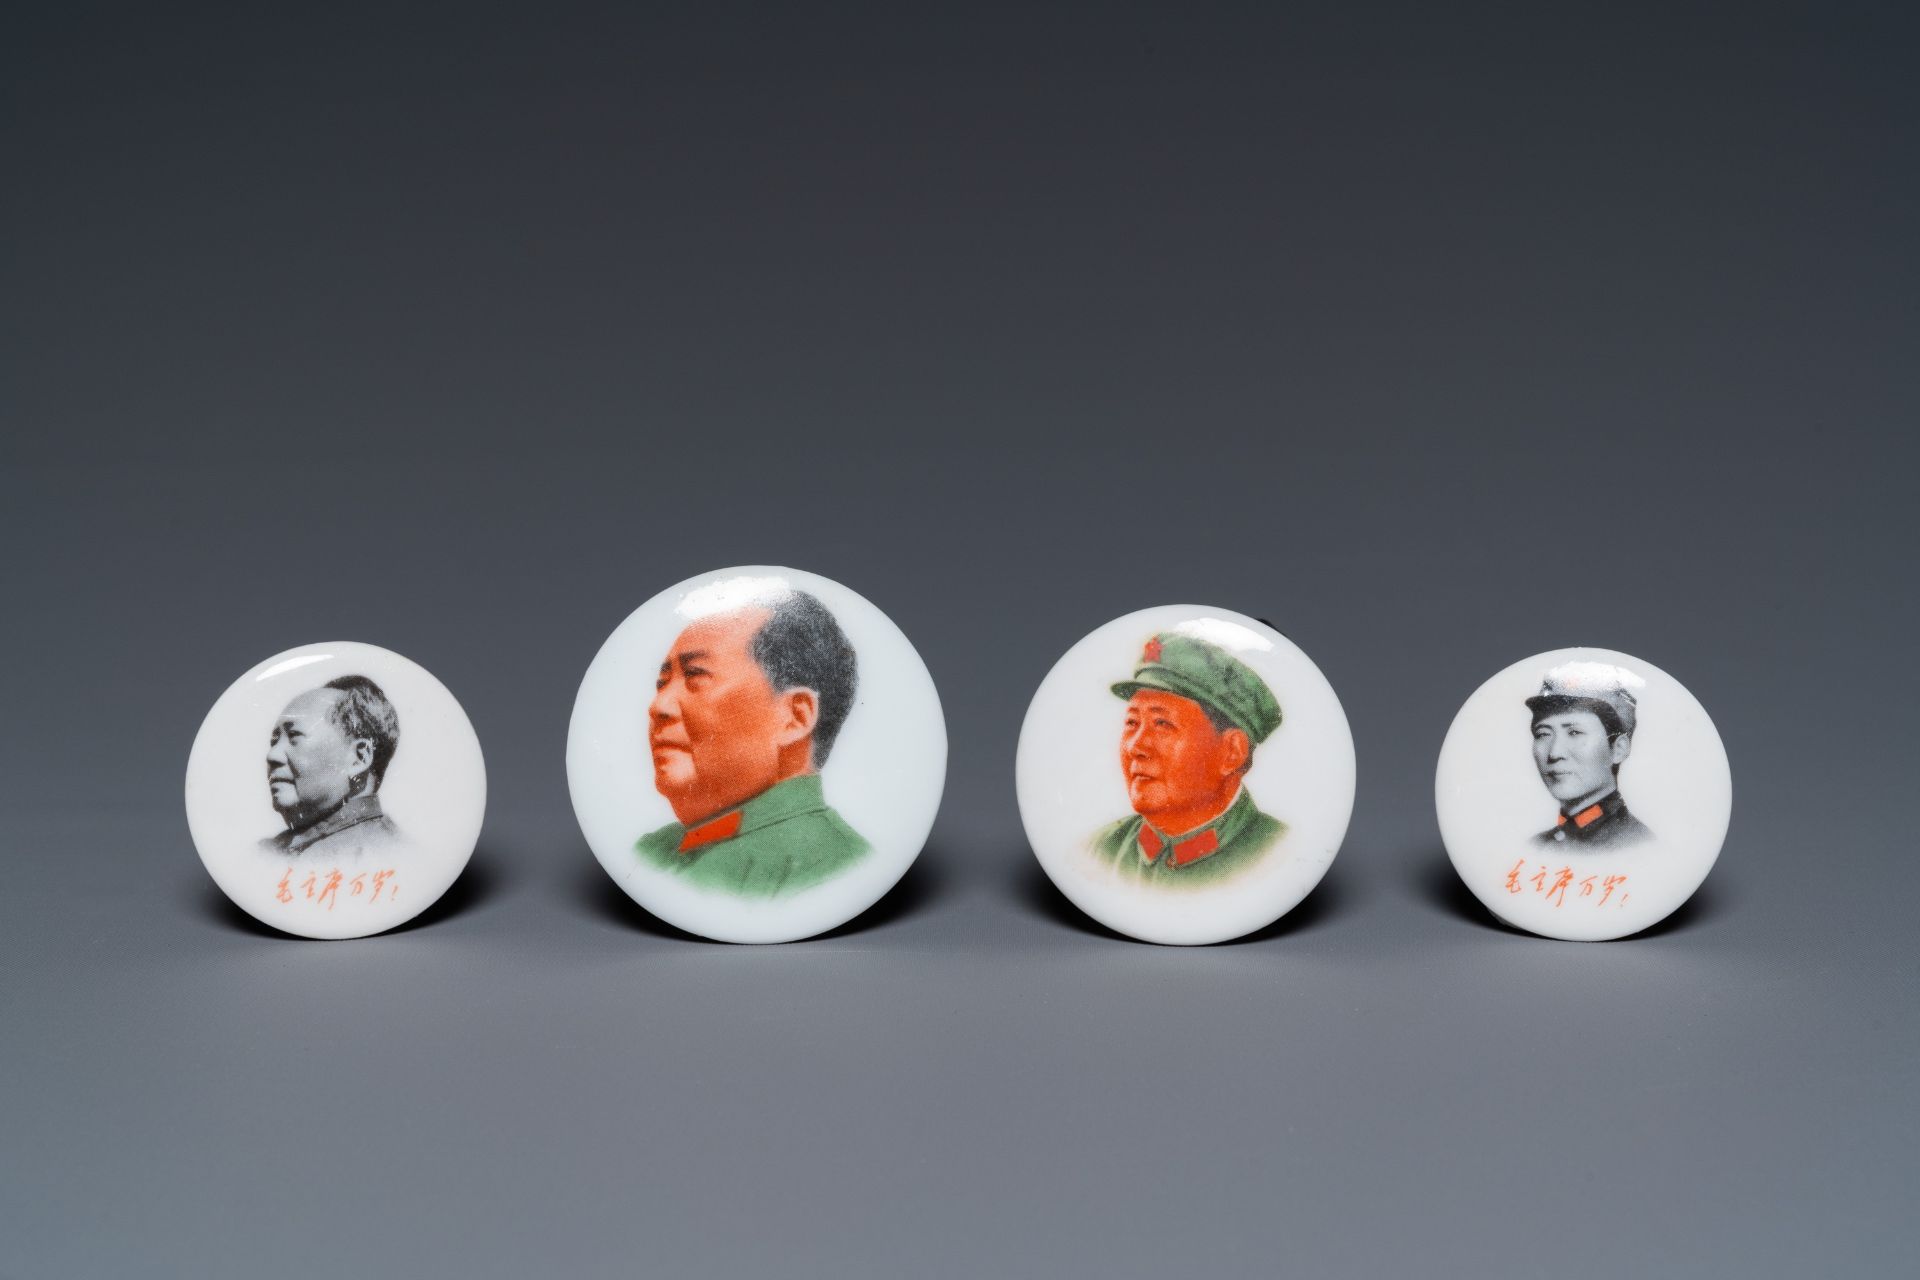 Nine Chinese communist portrait medallions and a plaque depicting Karl Marx, 20th C. - Image 7 of 23